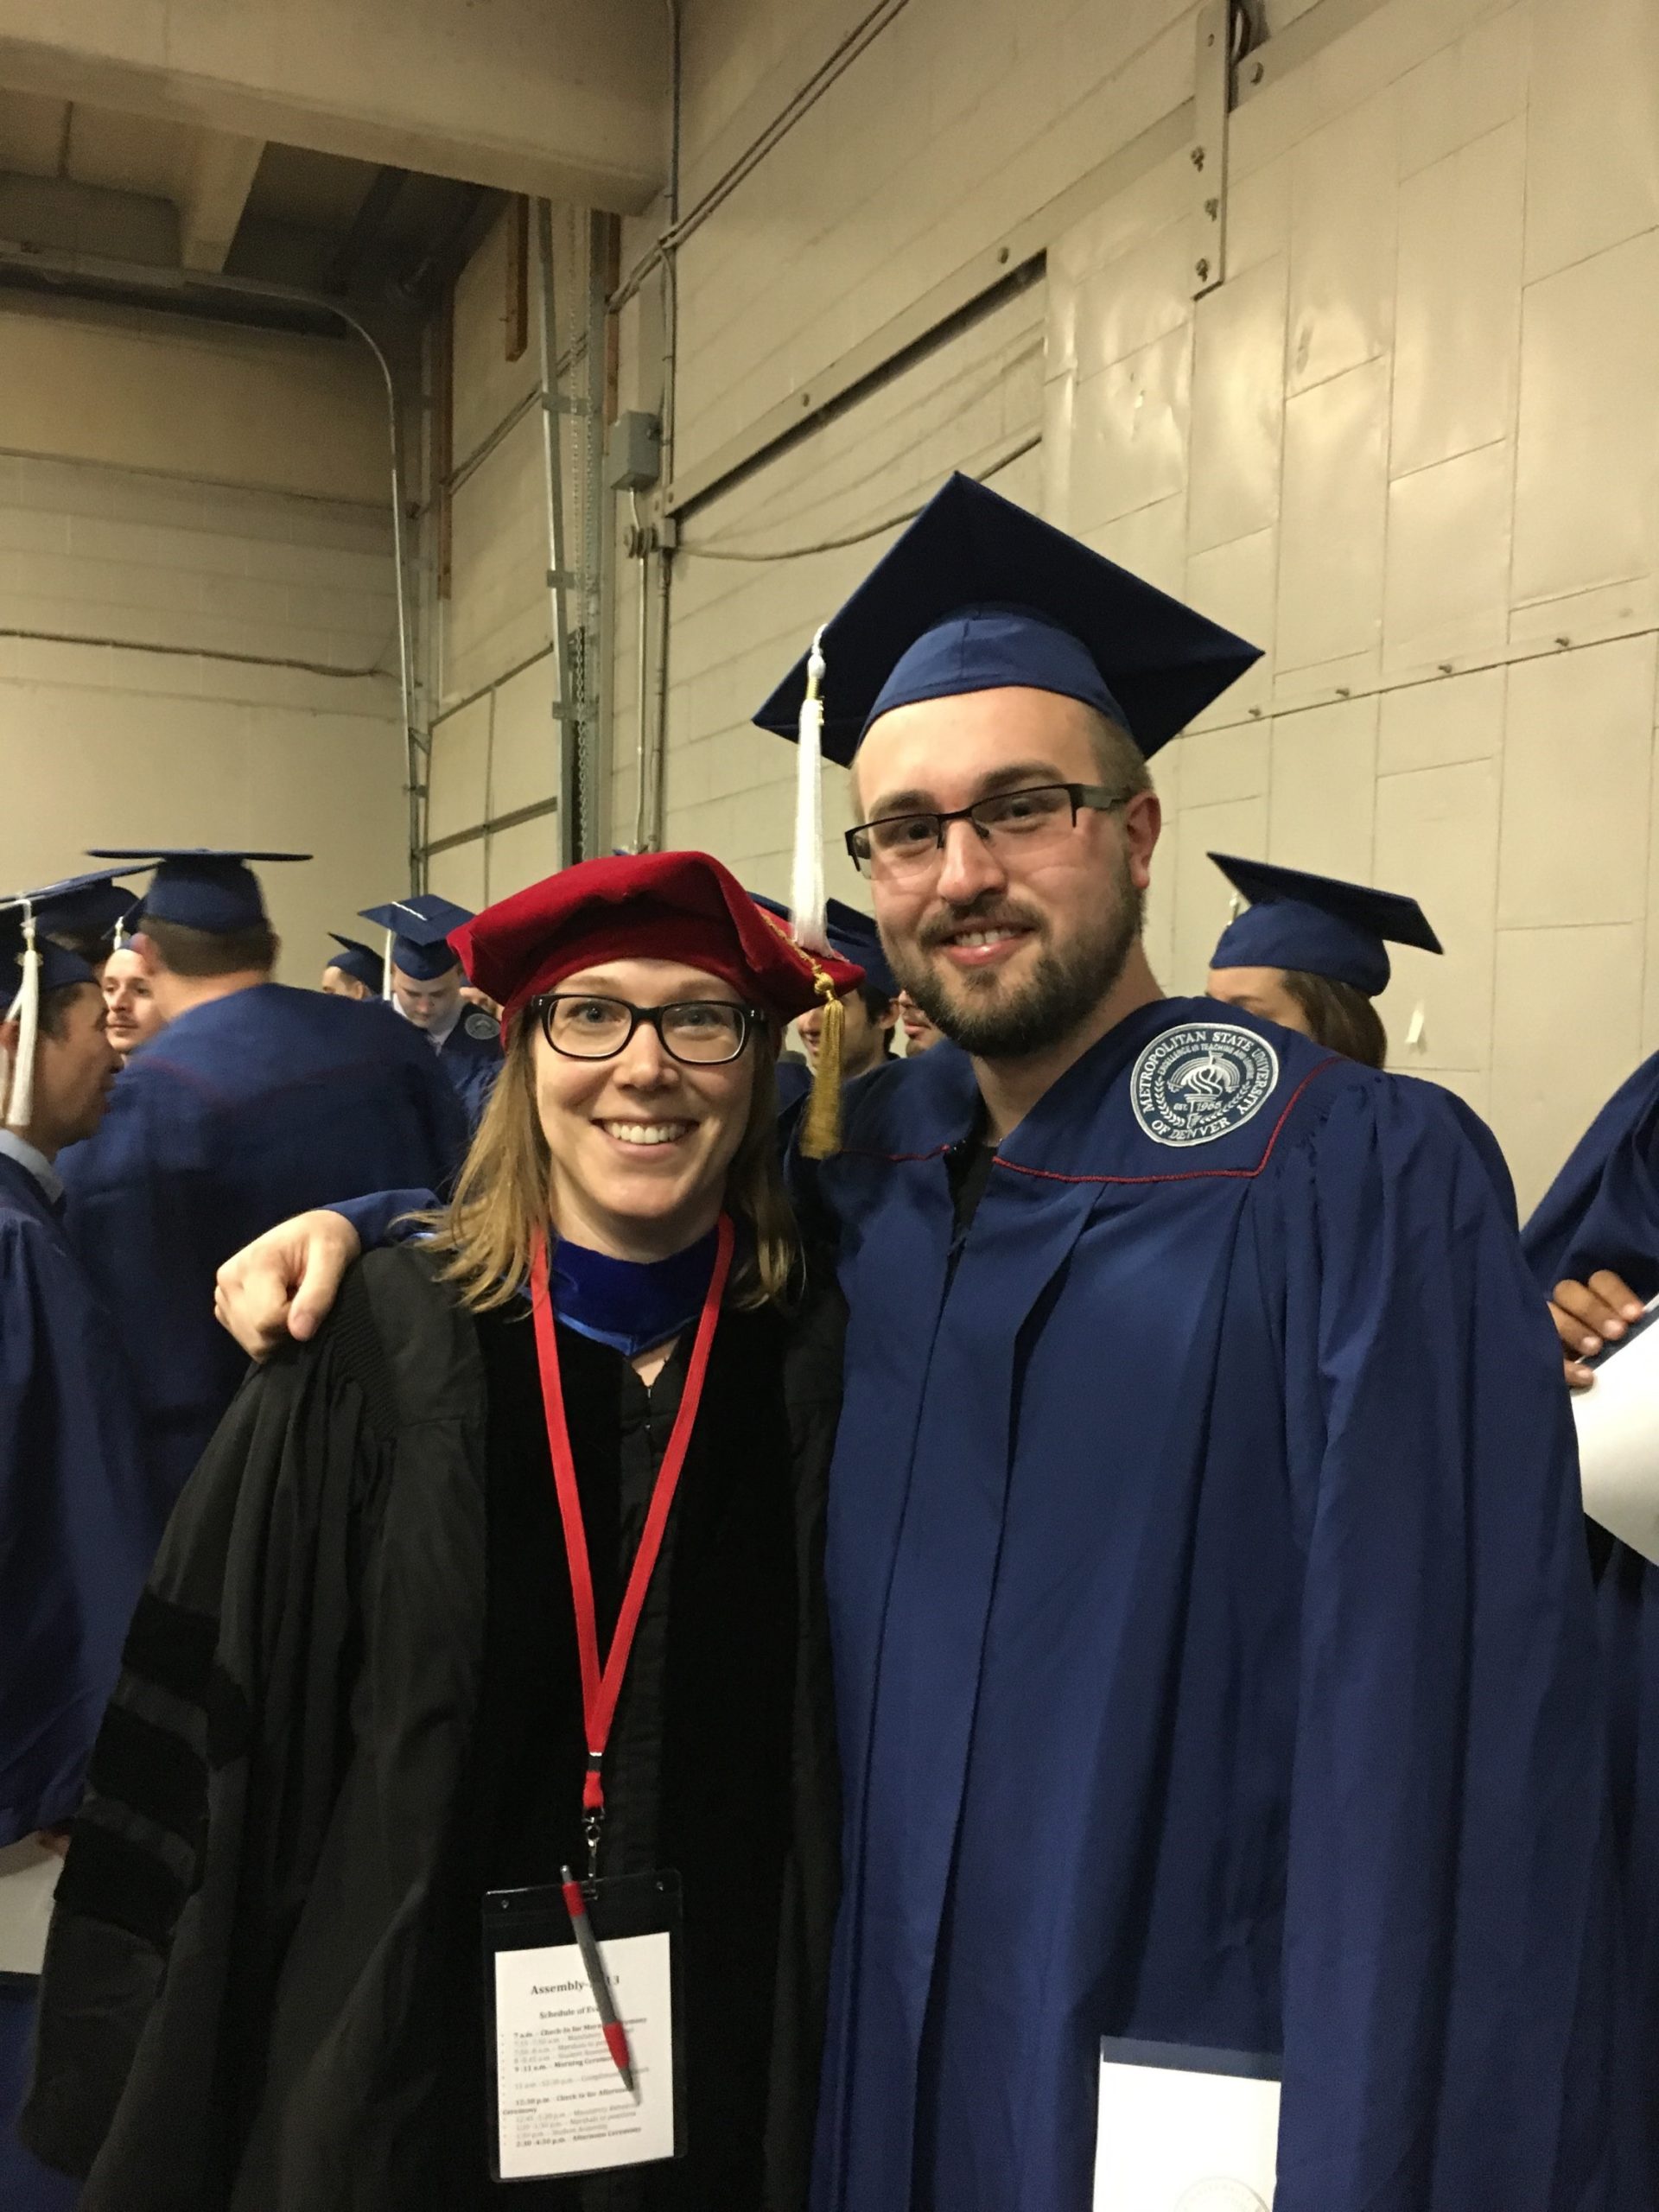 Cody Griffith in a cap and gown, posing with a professor